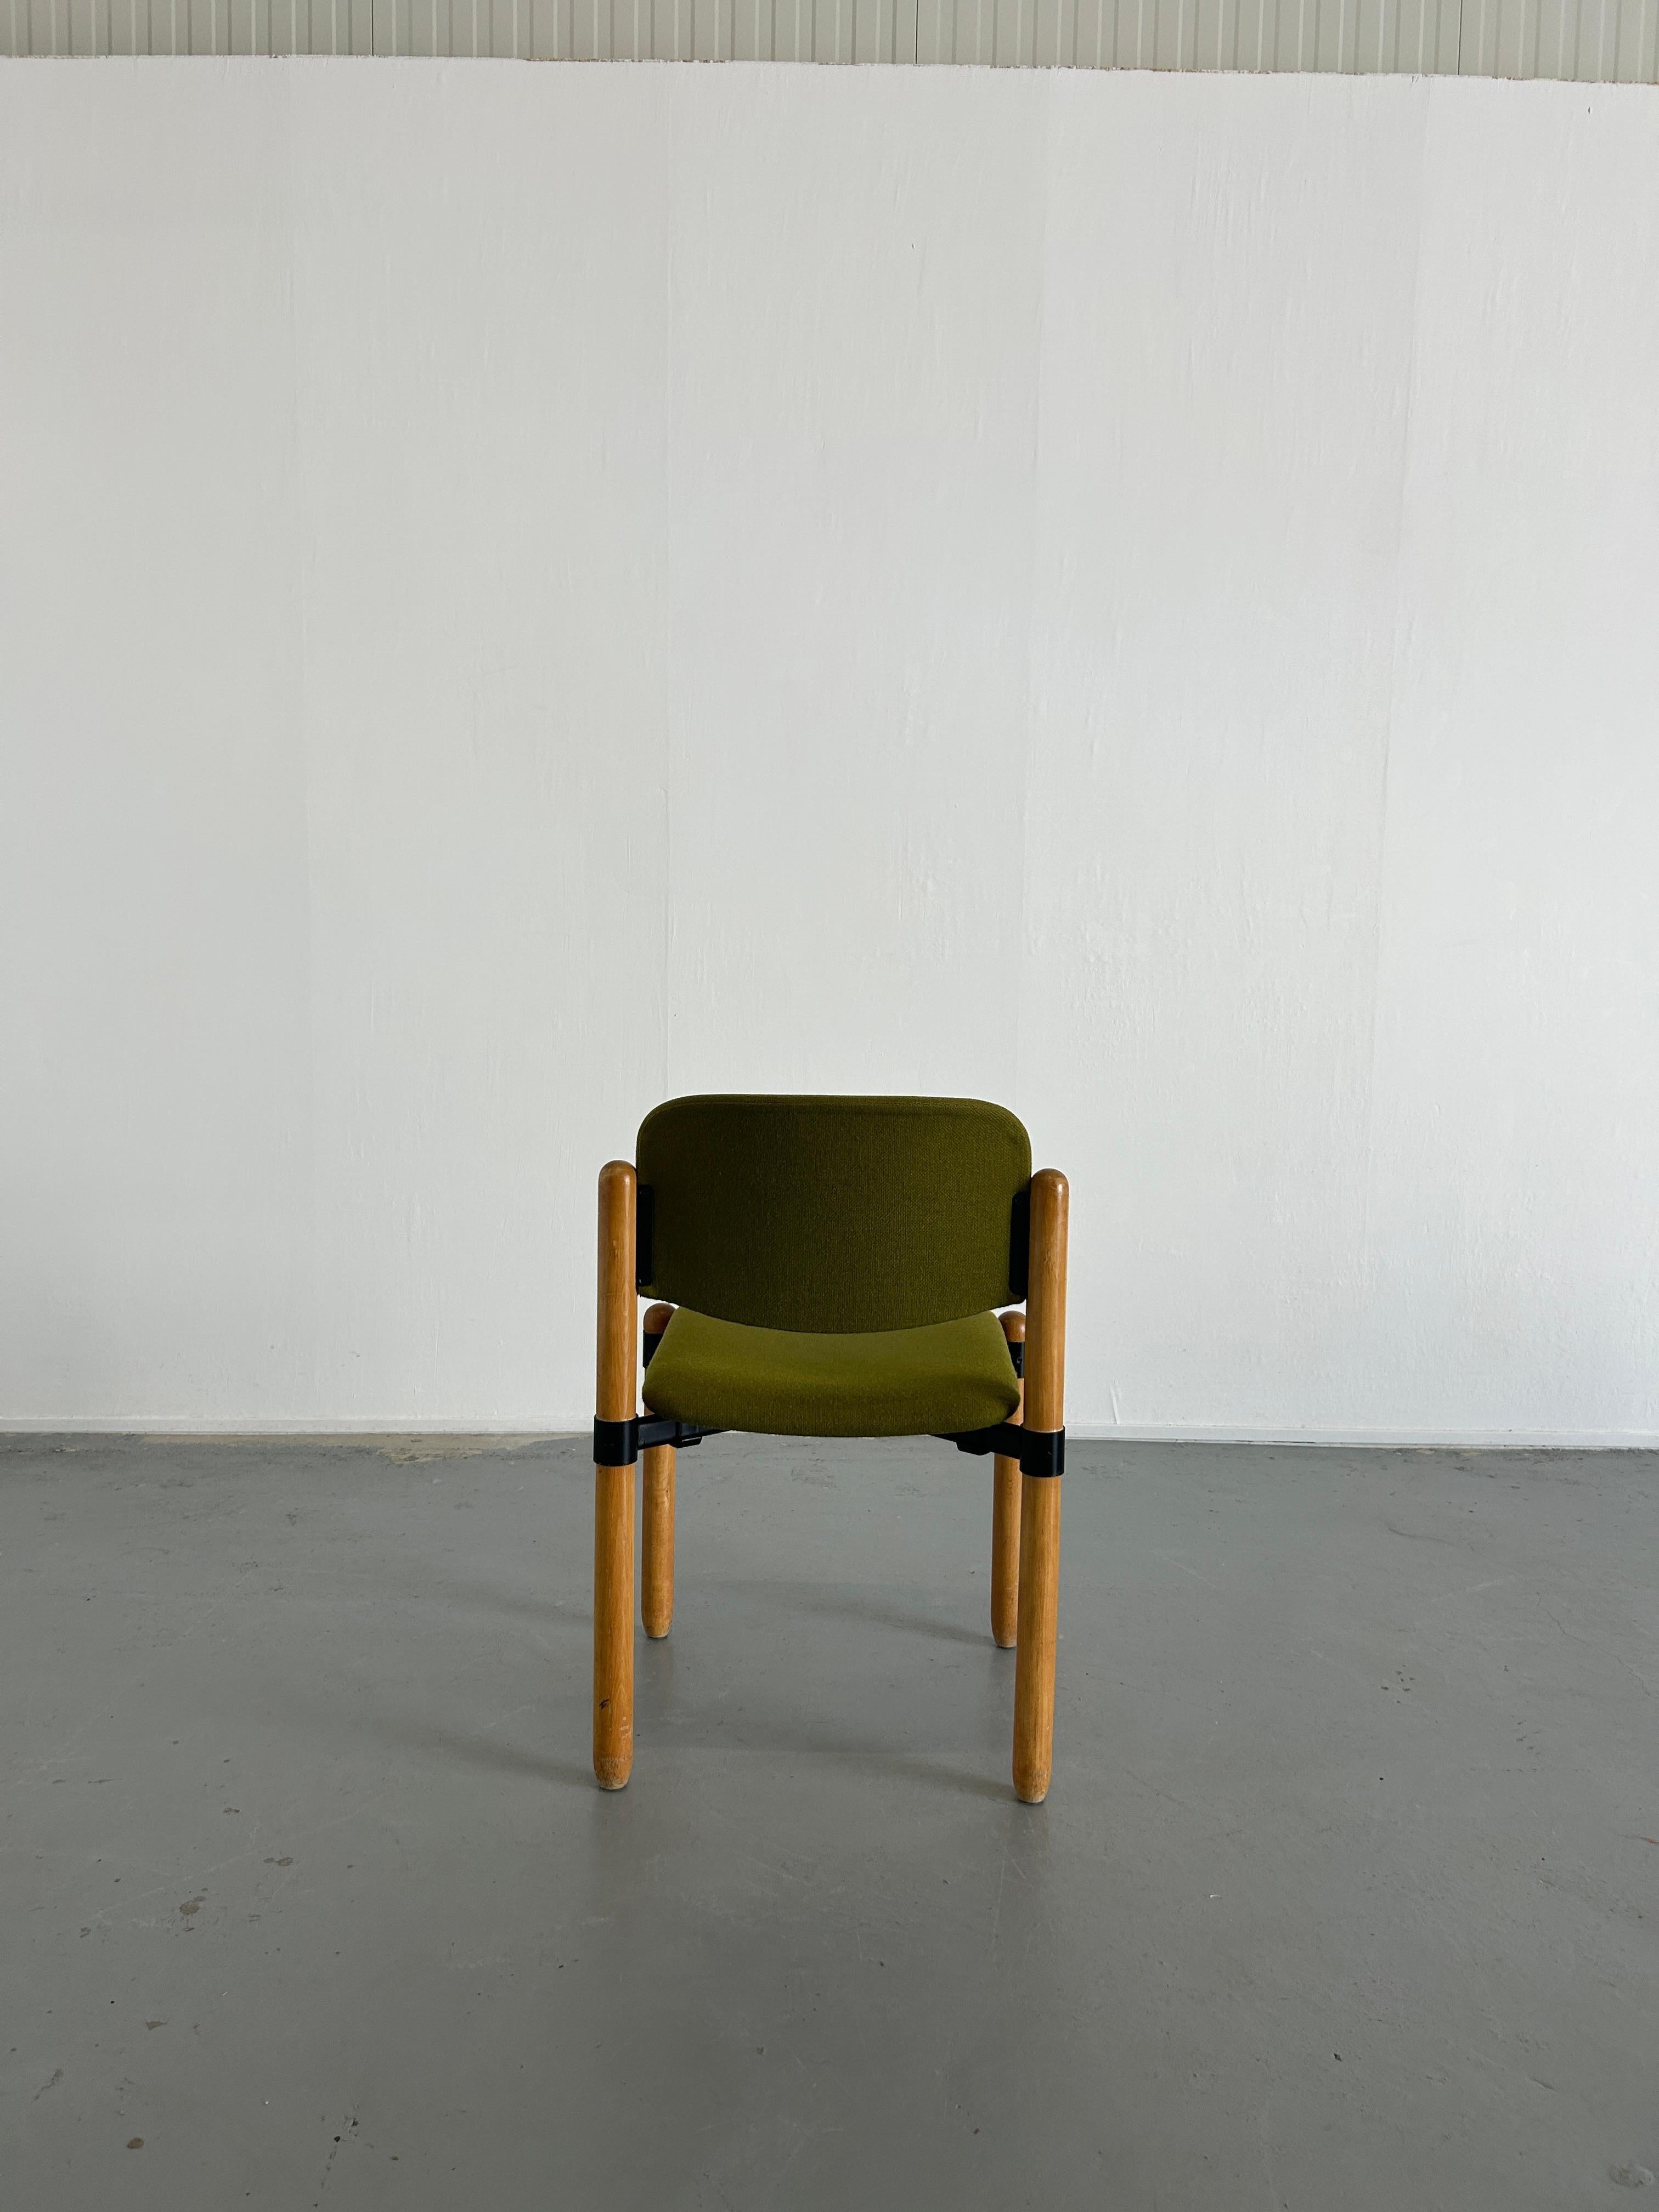 1/10 Mid Century Modern Stackable Dining Chairs by Fröscher Sitform, 70s Germany 1